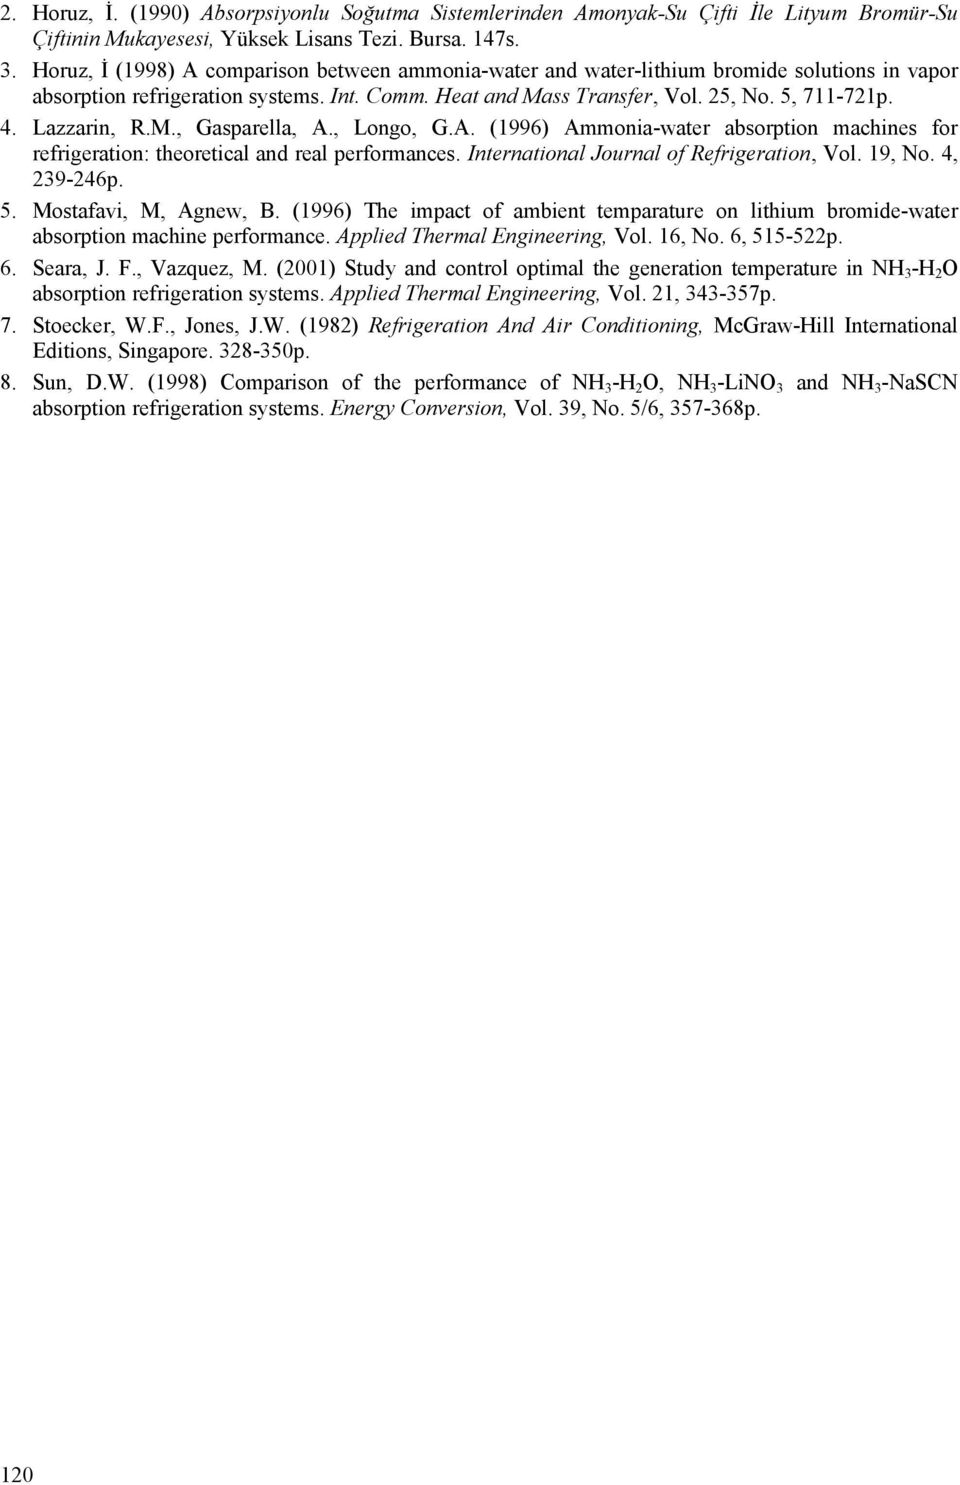 Laarin, R.M., Gasparella, A., Longo, G.A. (1996) Ammonia-water absorption machines or rerigeration: theoretical and real perormances. International Journal o Rerigeration, Vol. 19, No. 4, 29-246p. 5.